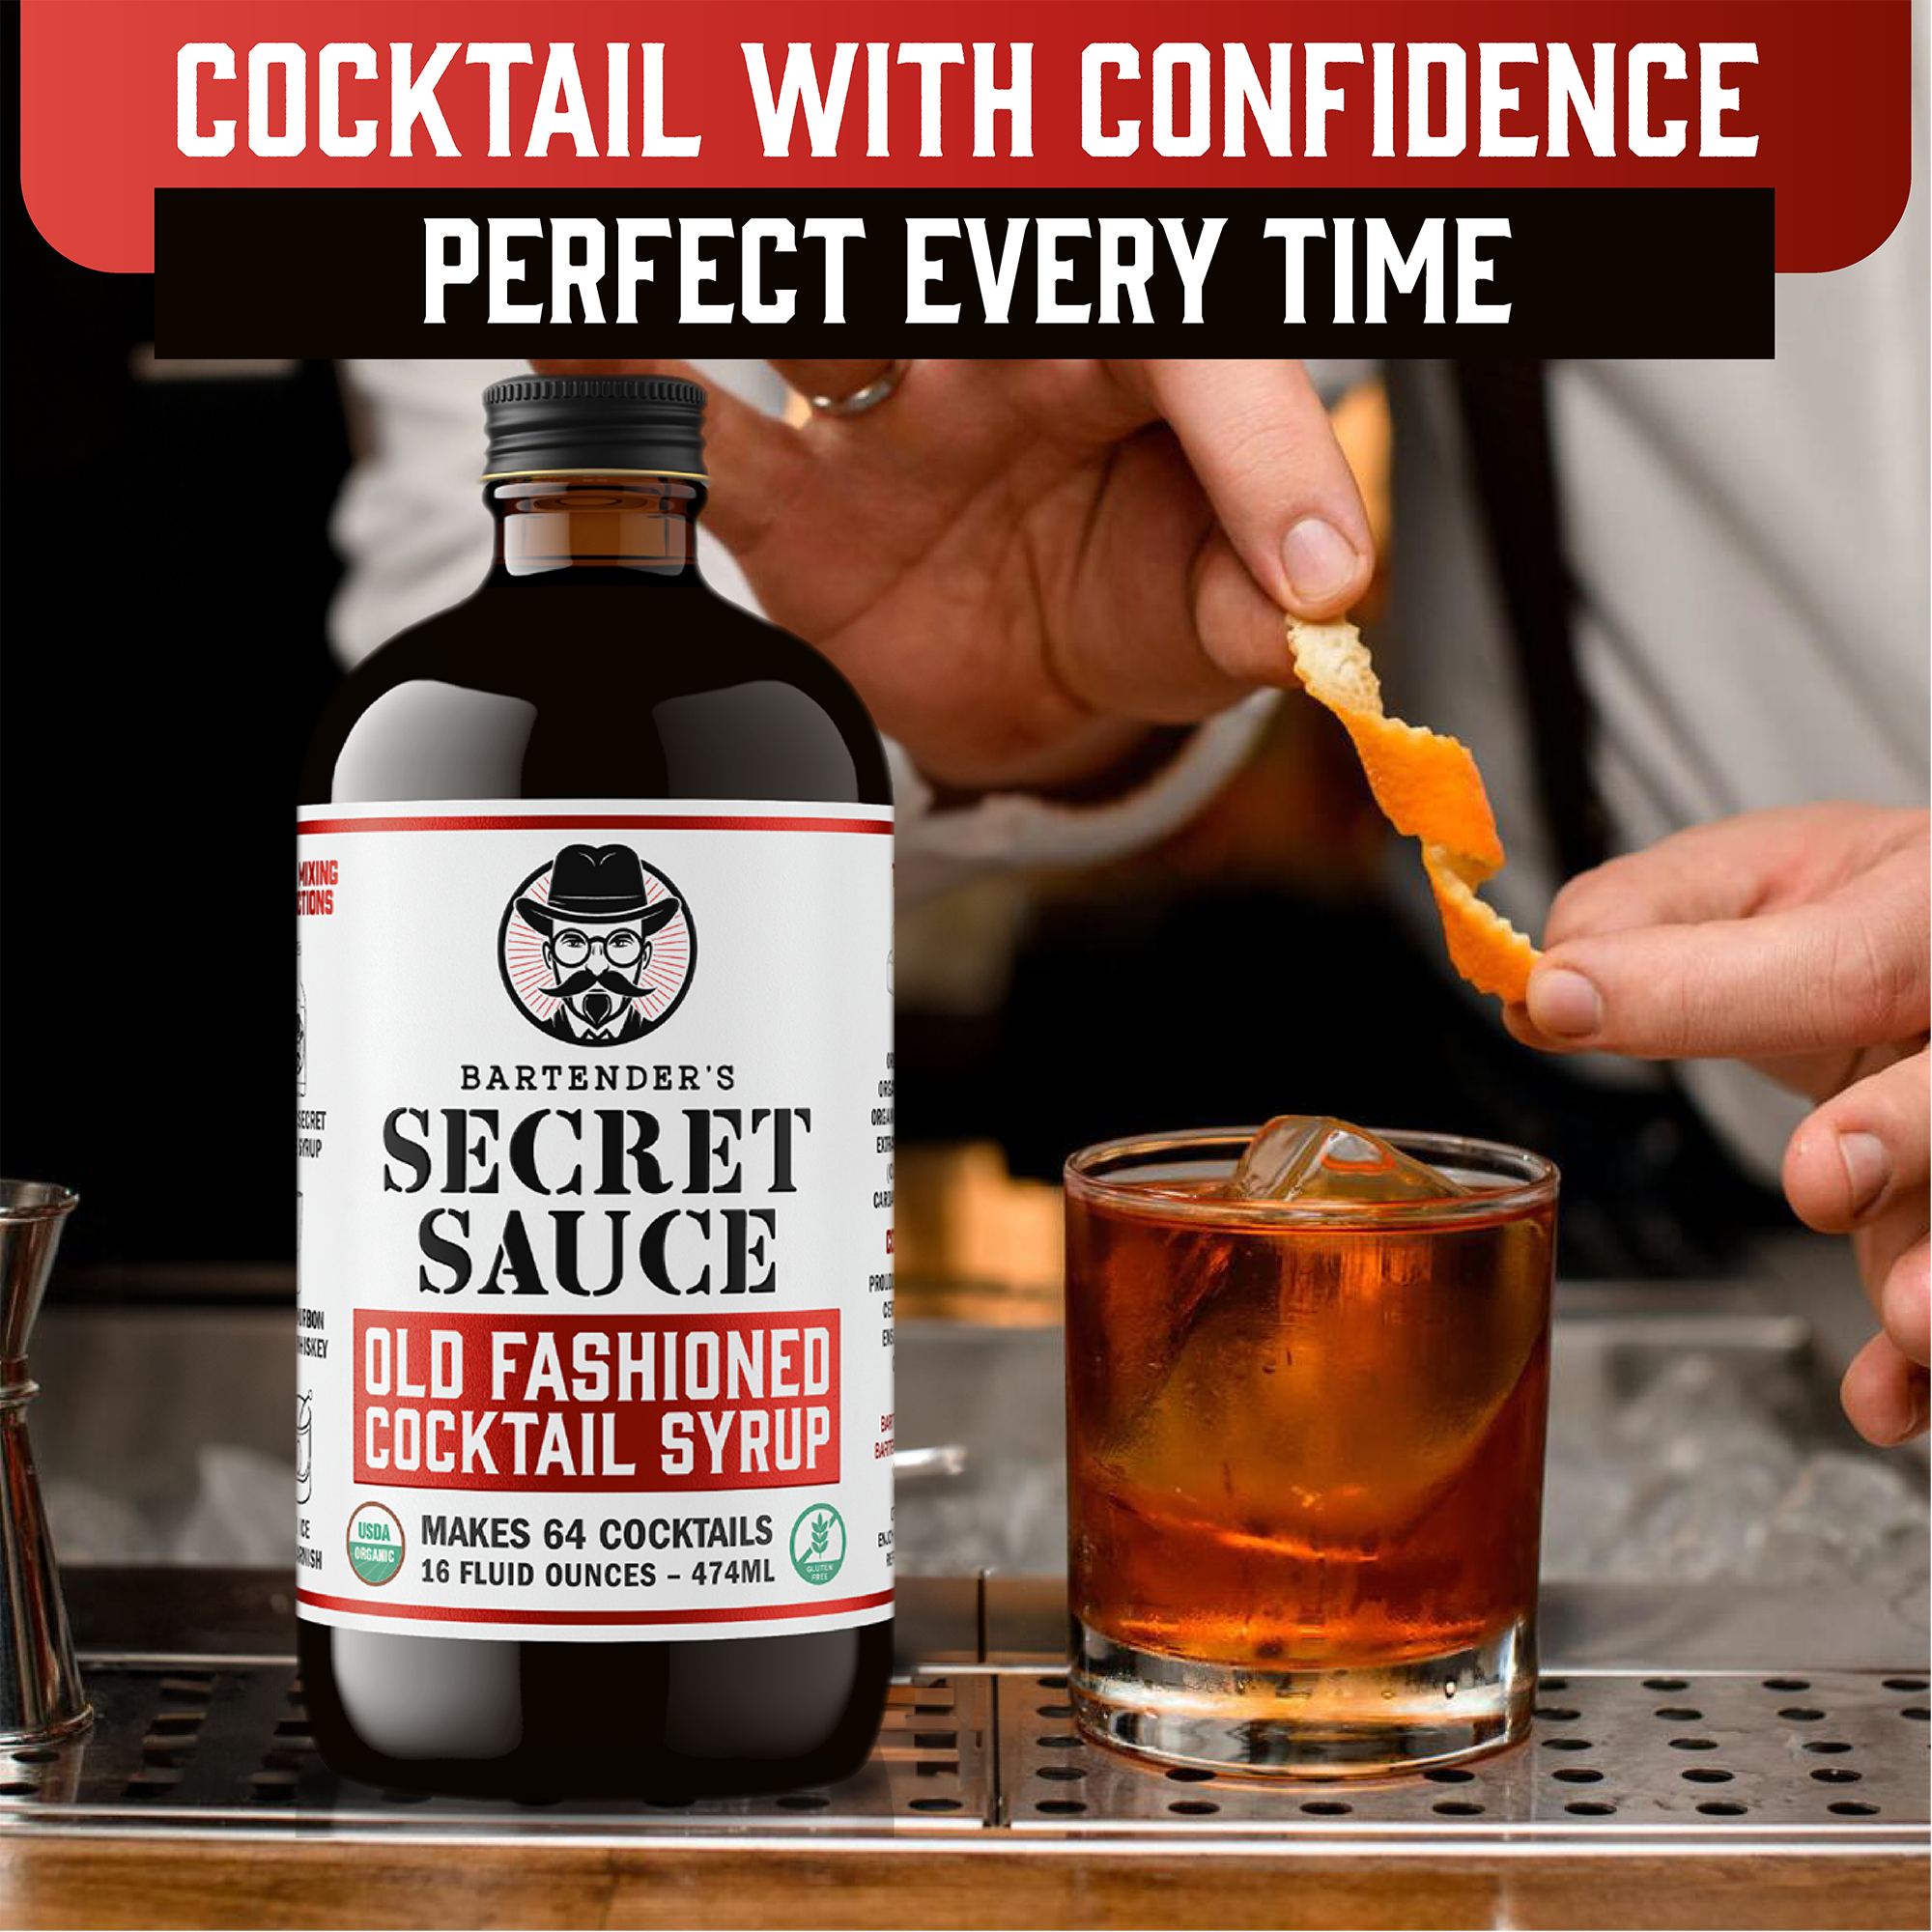 Bartender’s Secret Sauce Old Fashioned Cocktail Syrup - Makes 128 Cocktails - 16 OZ (Pack of 2) with 1 Ice Mold -  USDA Organic, Gluten Free, OU Kosher - Contains Bitters, Orange Peel, Cherry and Organic Cane Sugar